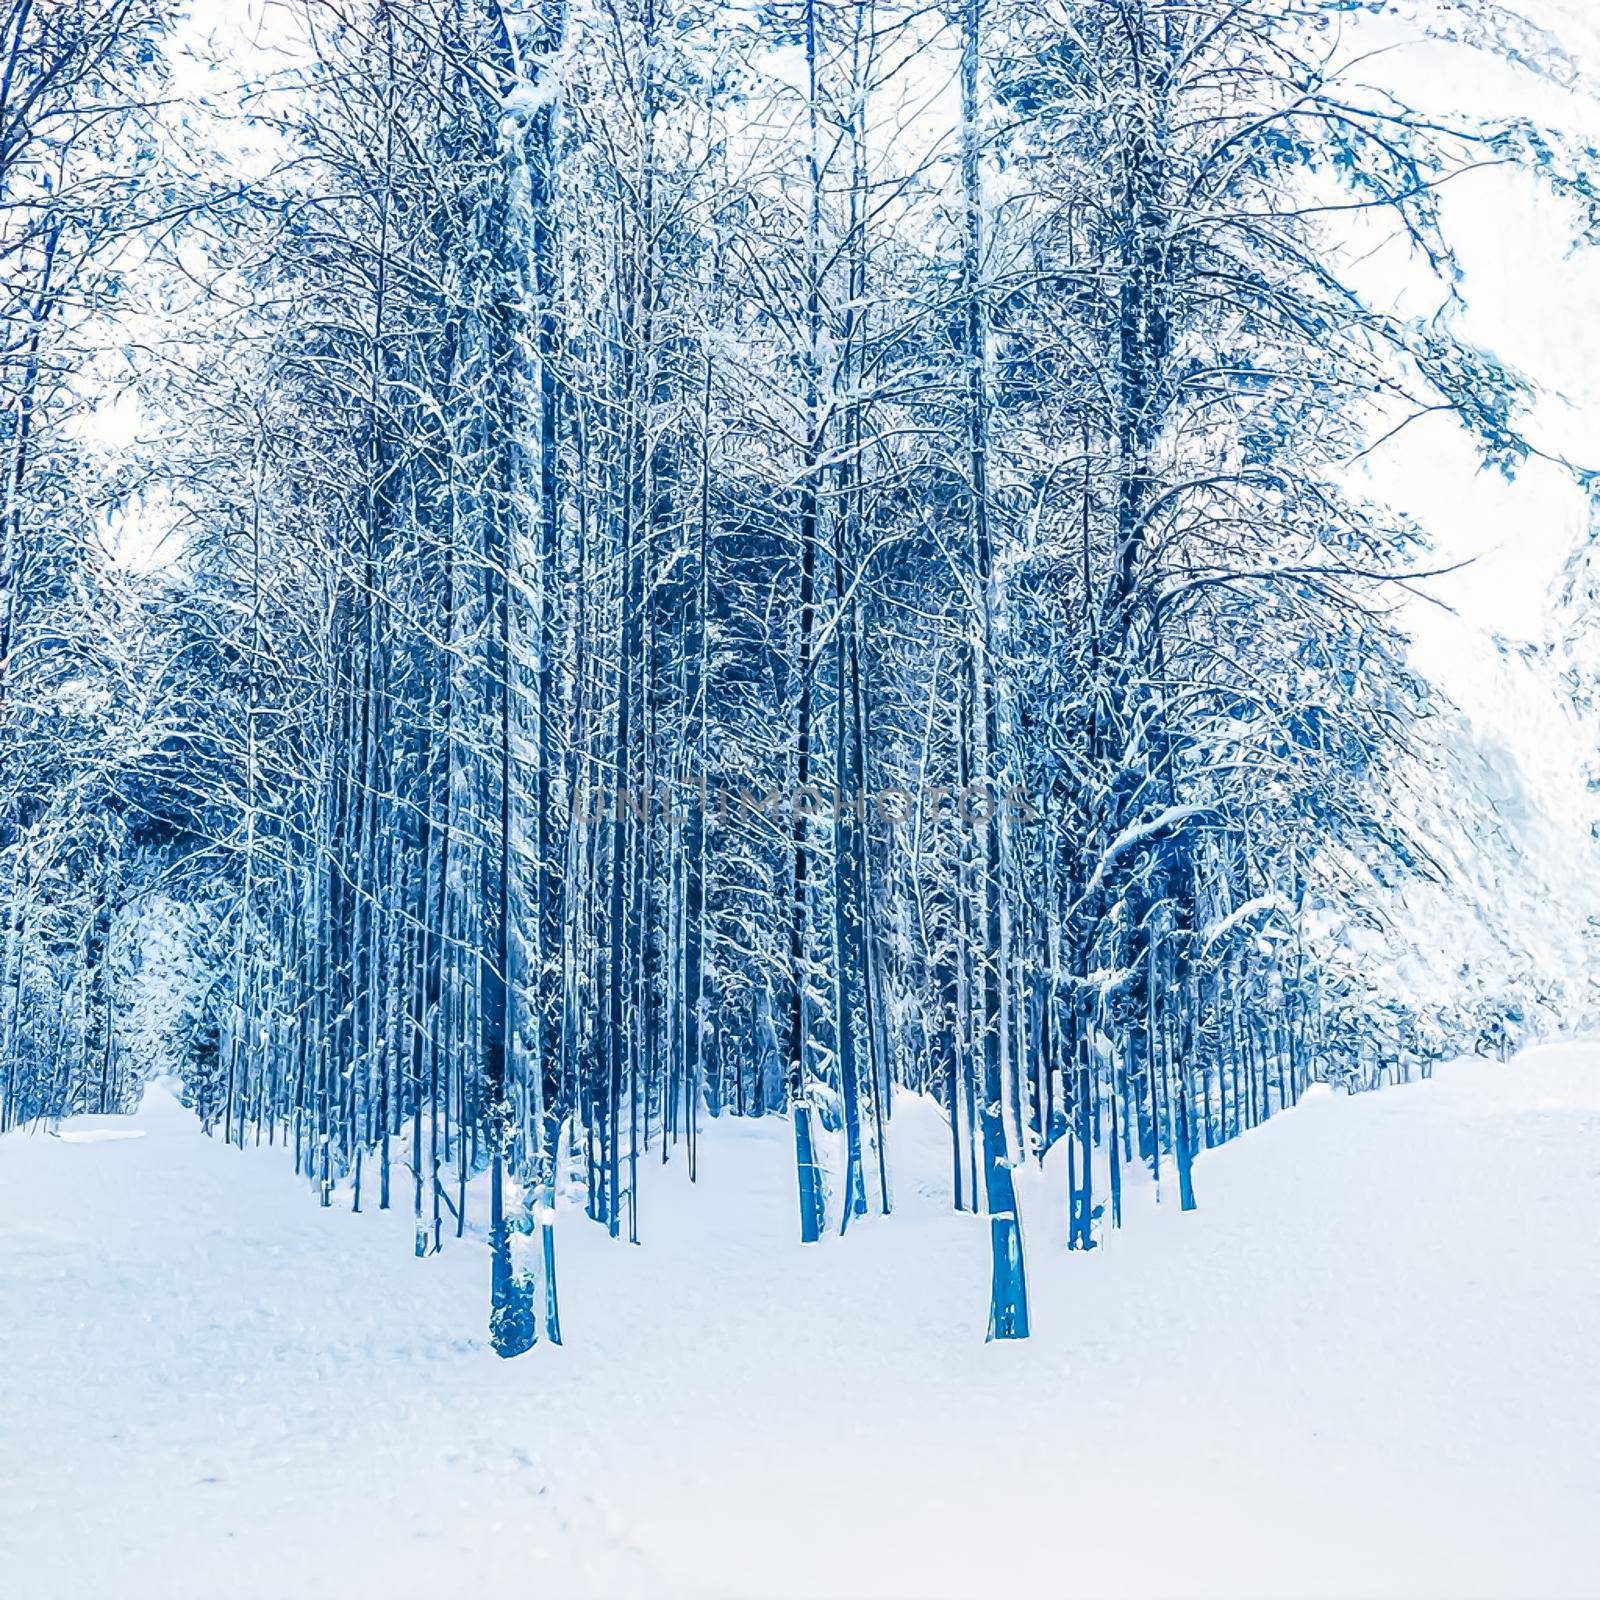 Winter wonderland and Christmas landscape. Snowy forest, trees covered with snow as holiday background.